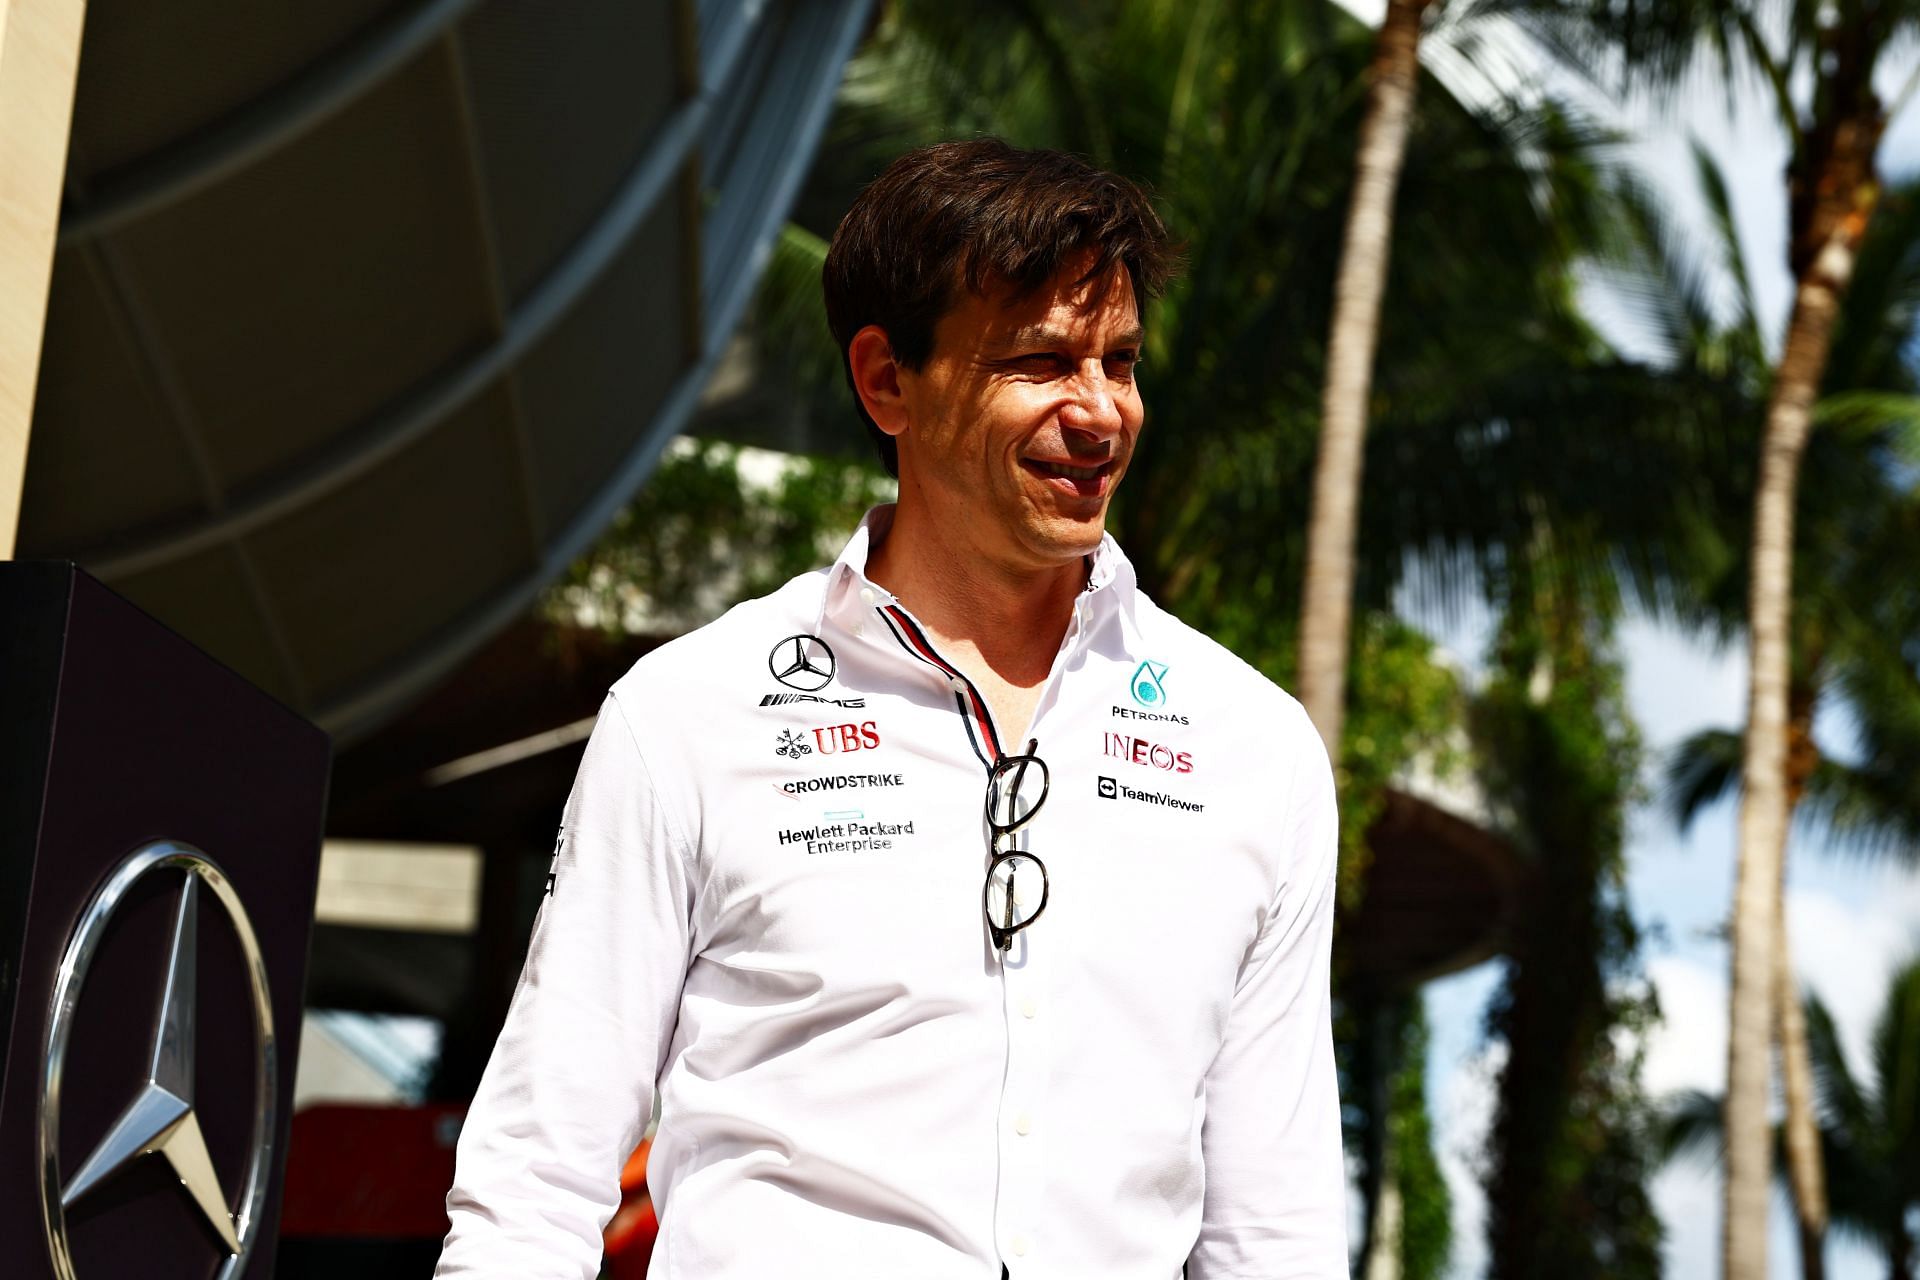 Mercedes GP Executive Director Toto Wolff walks in the F1 paddock. (Photo by Mark Thompson/Getty Images)